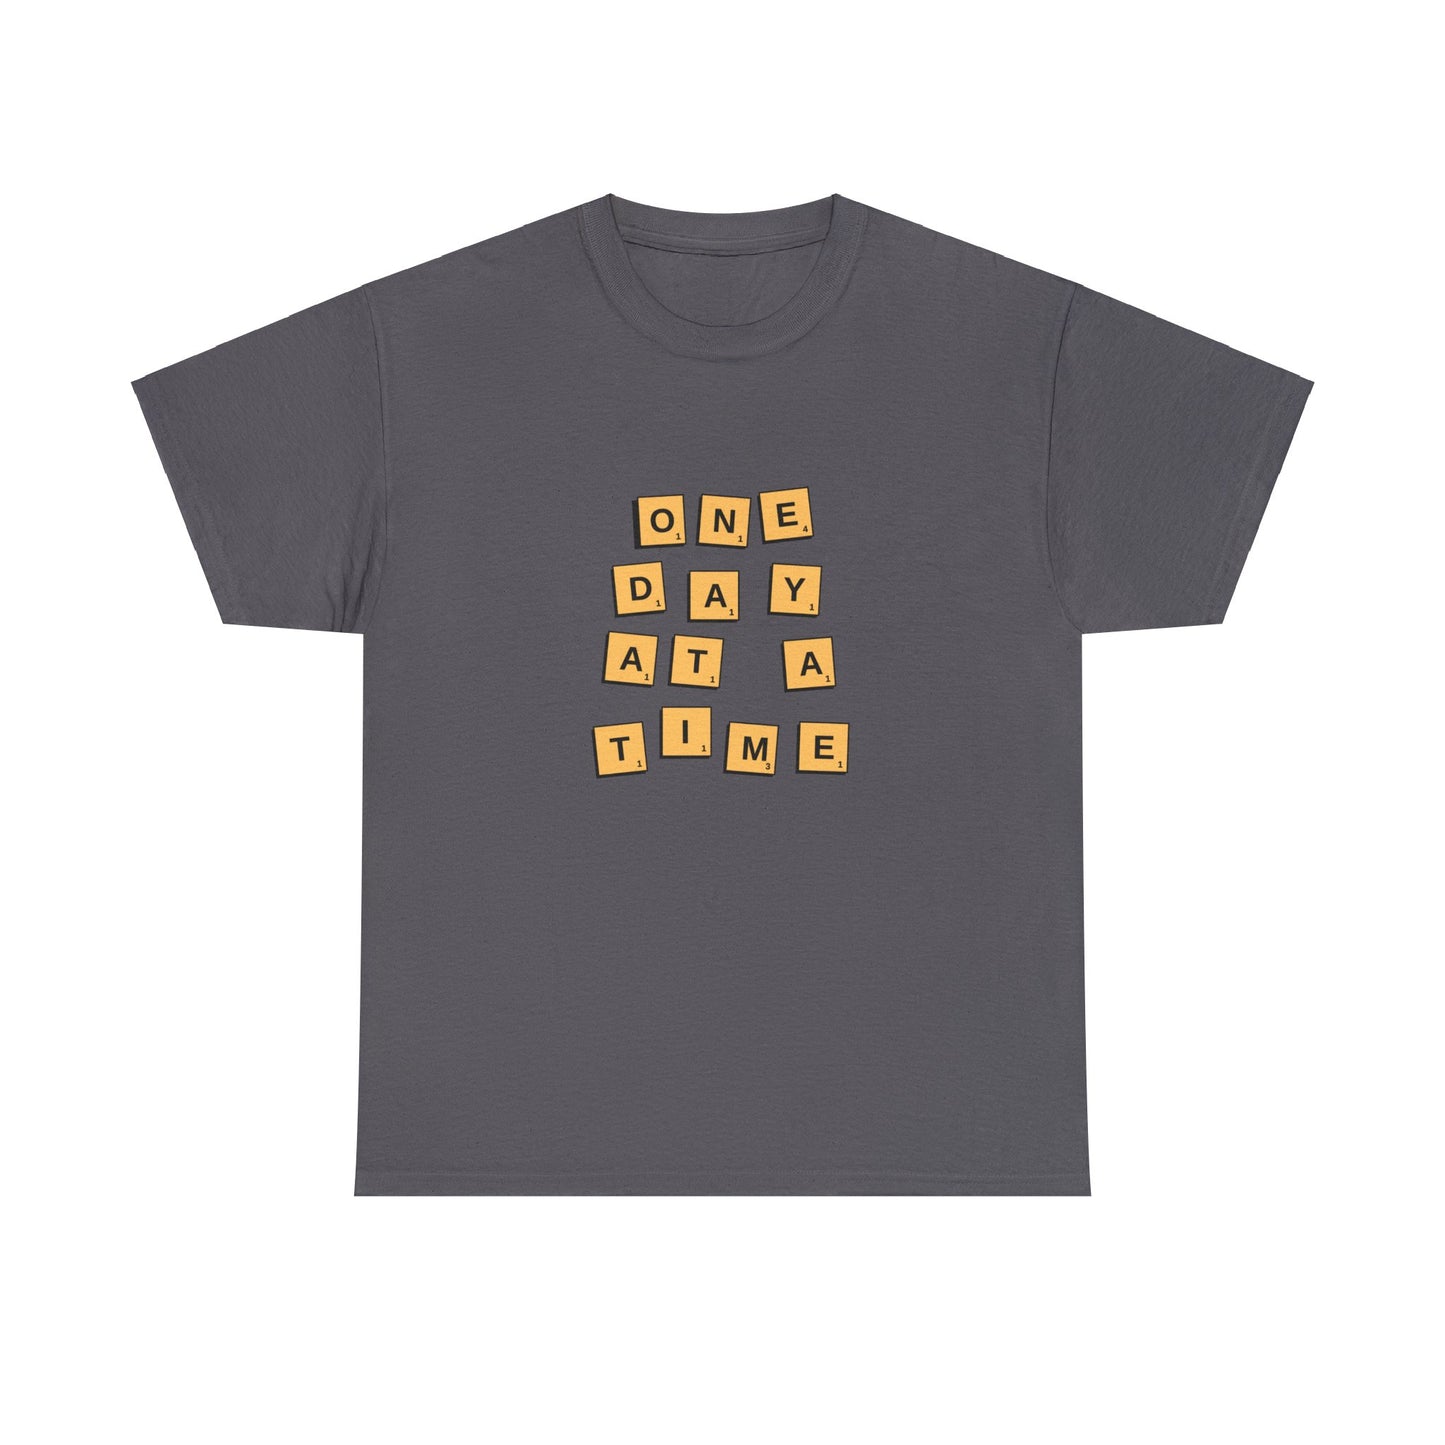 One Day At A Time Tee